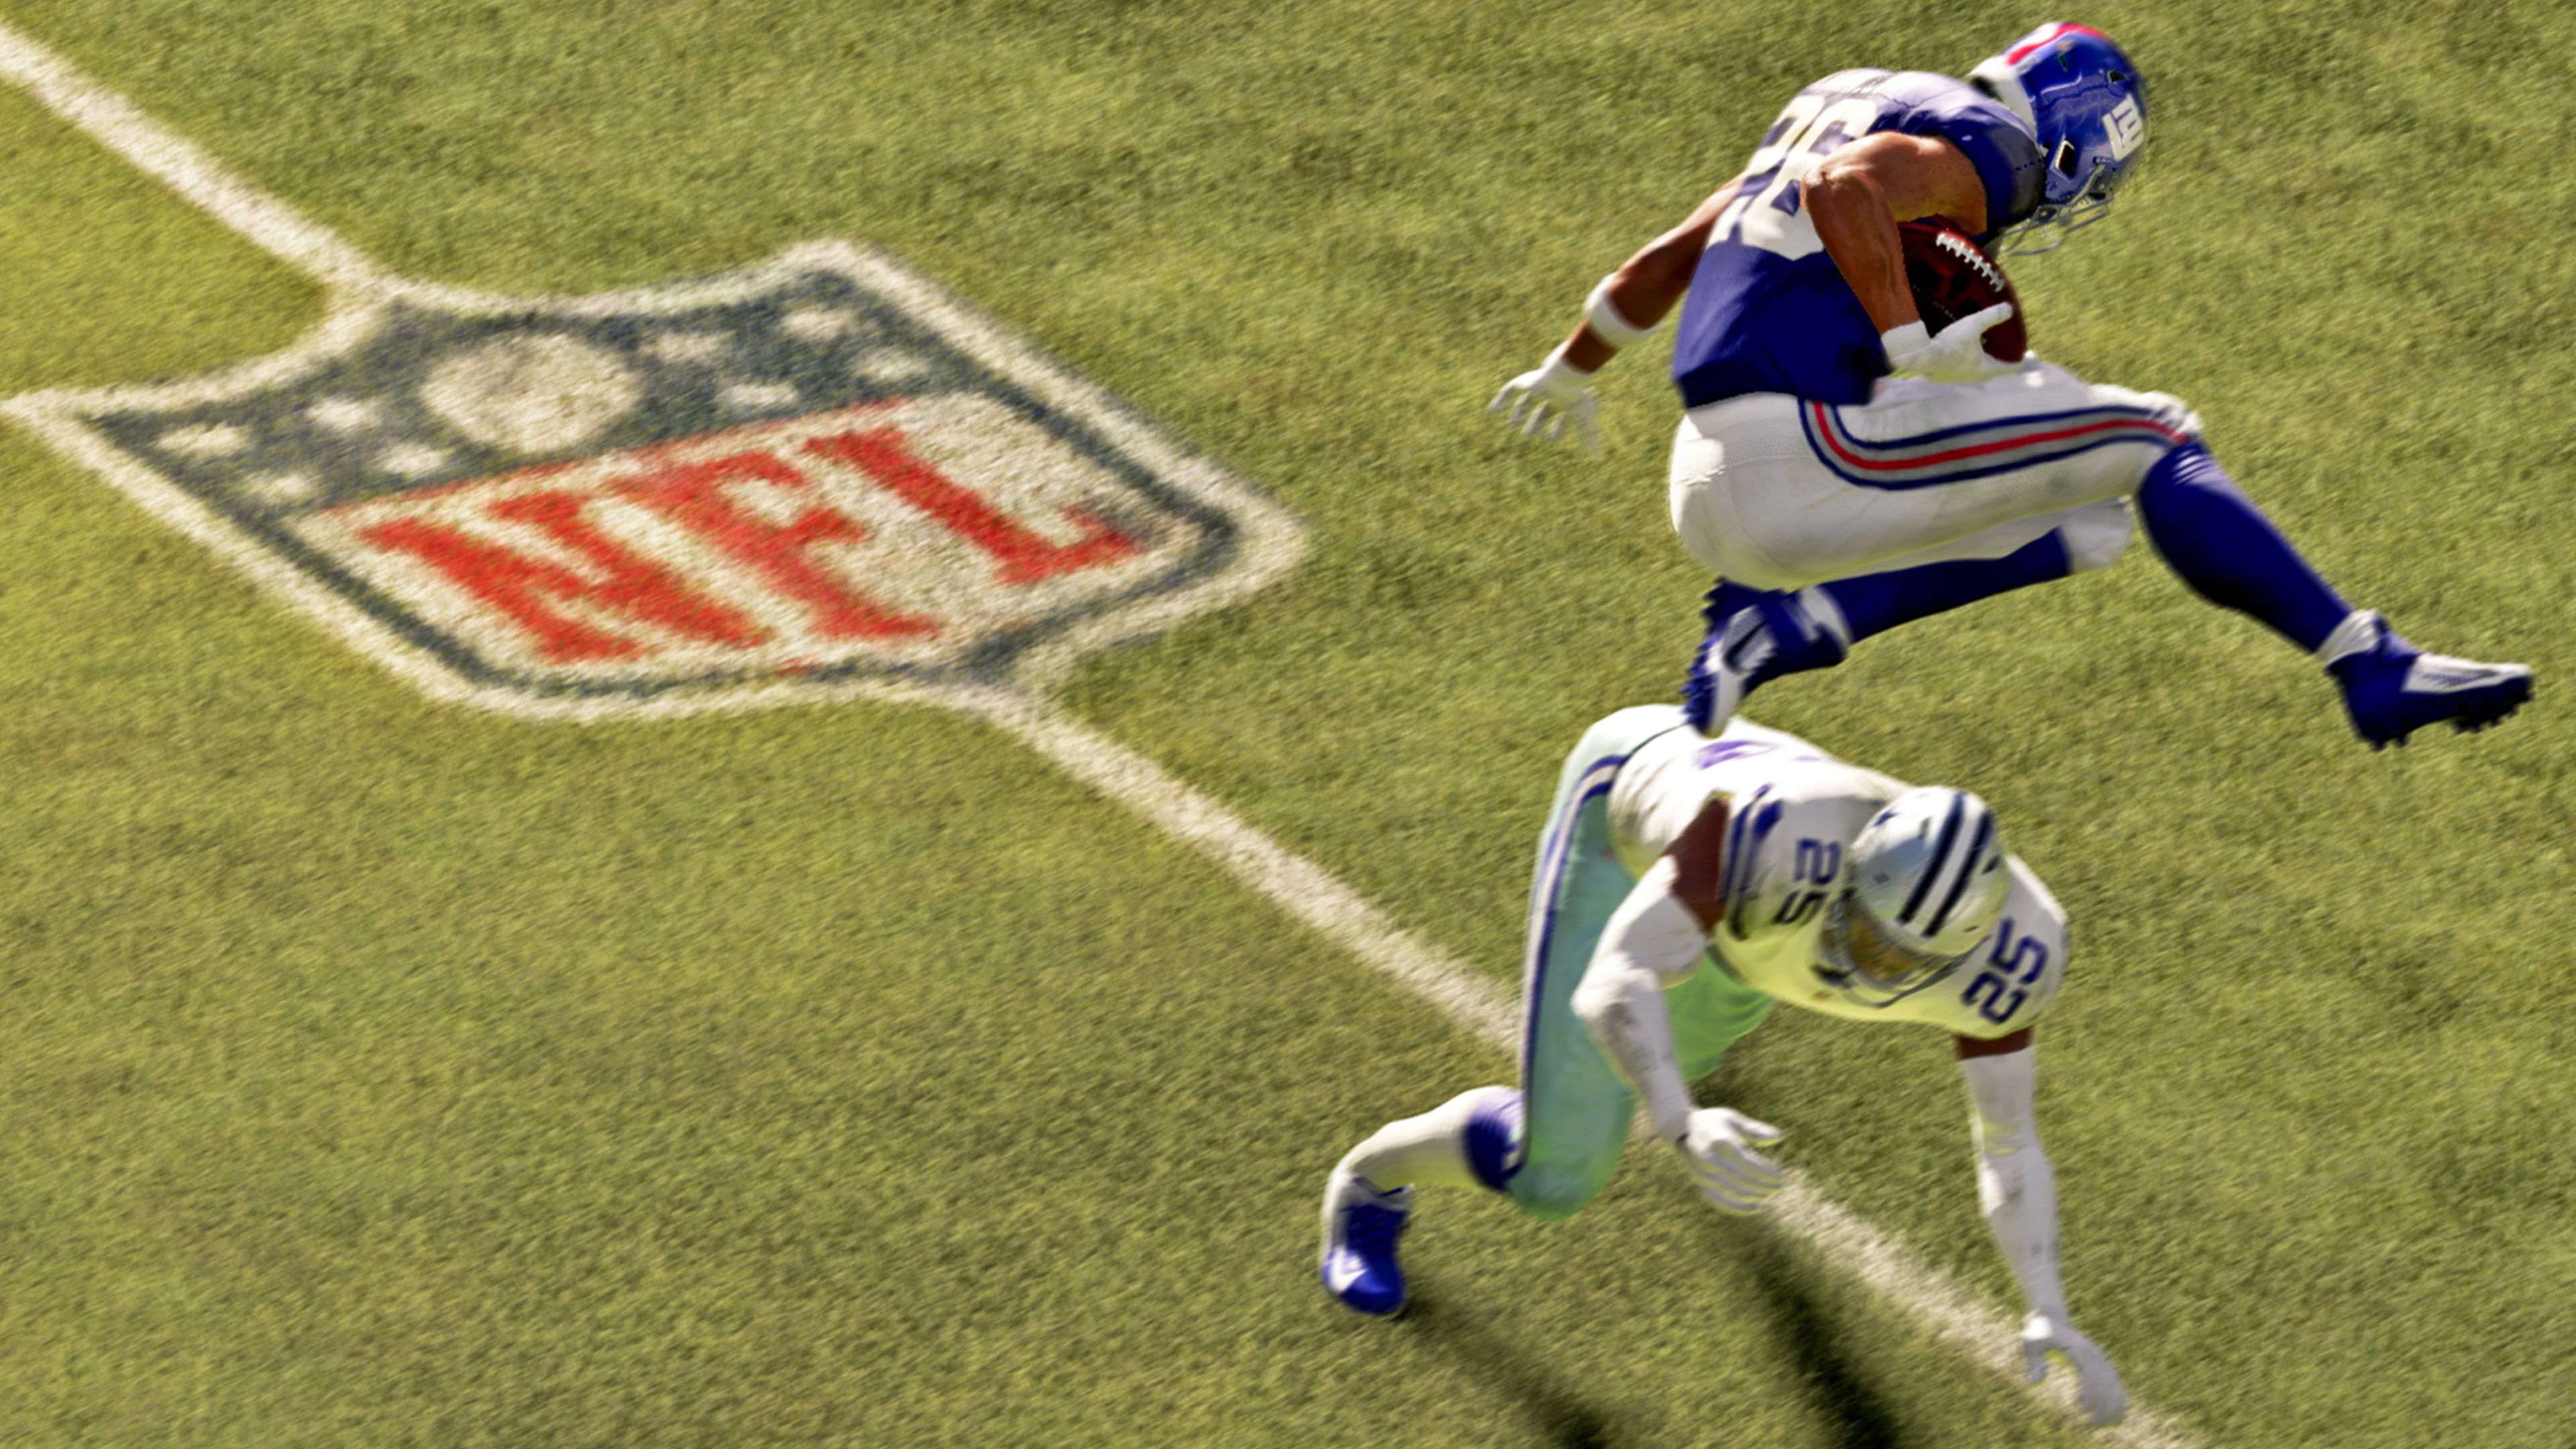 madden 20 ps4 price playstation store